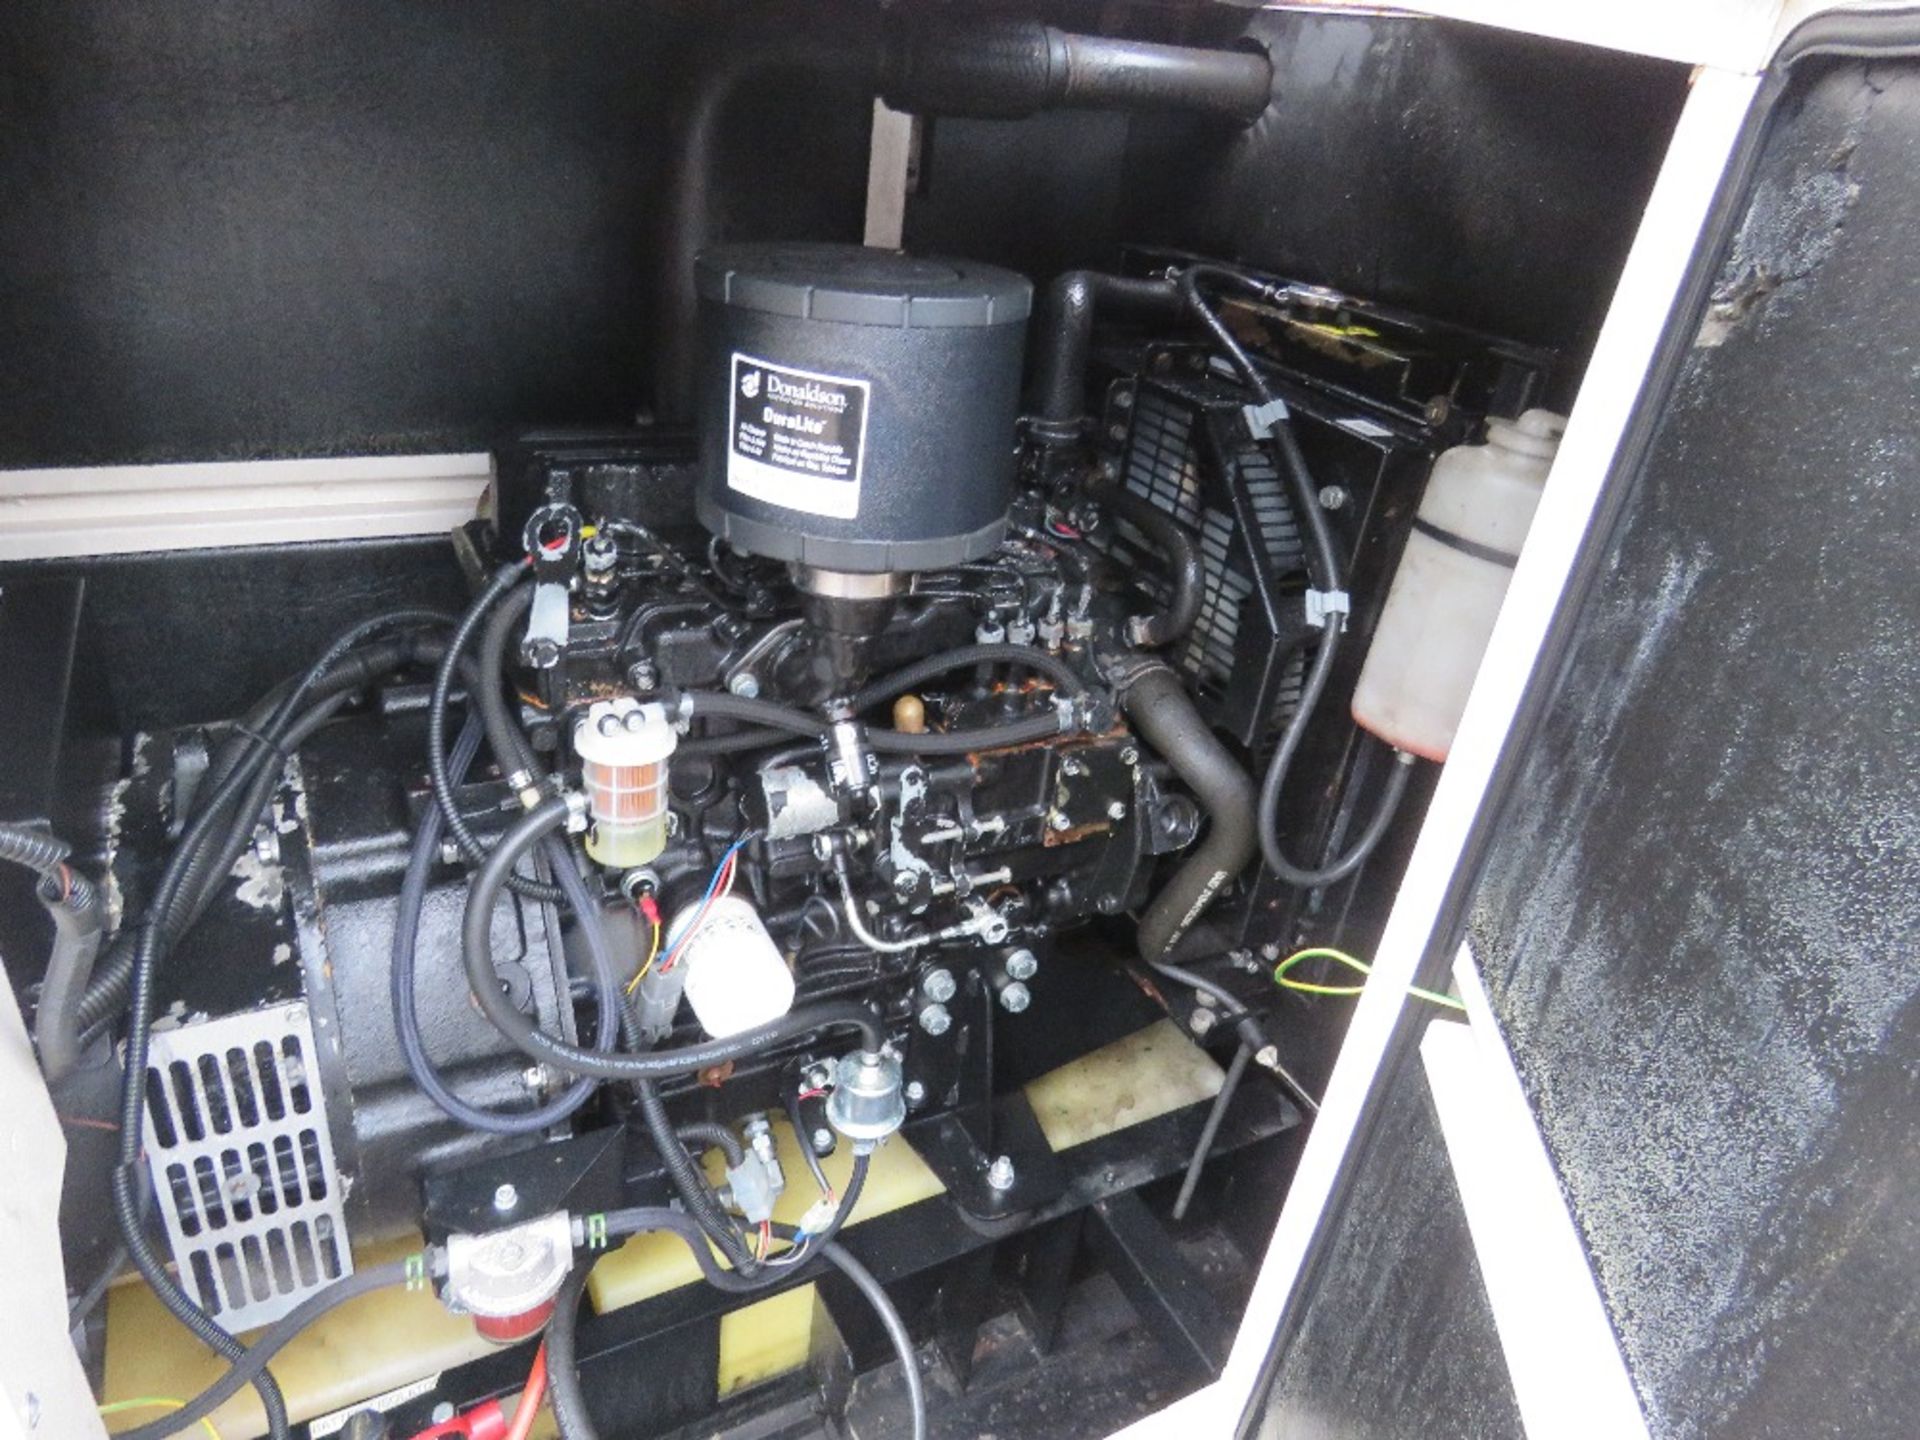 JCB 11KVA SKID MOUNTED SILENCED GENERATOR, SINGLE PHASE 240V OUTPUT, 2016 BUILD. SOURCED FROM MAJOR - Image 3 of 5